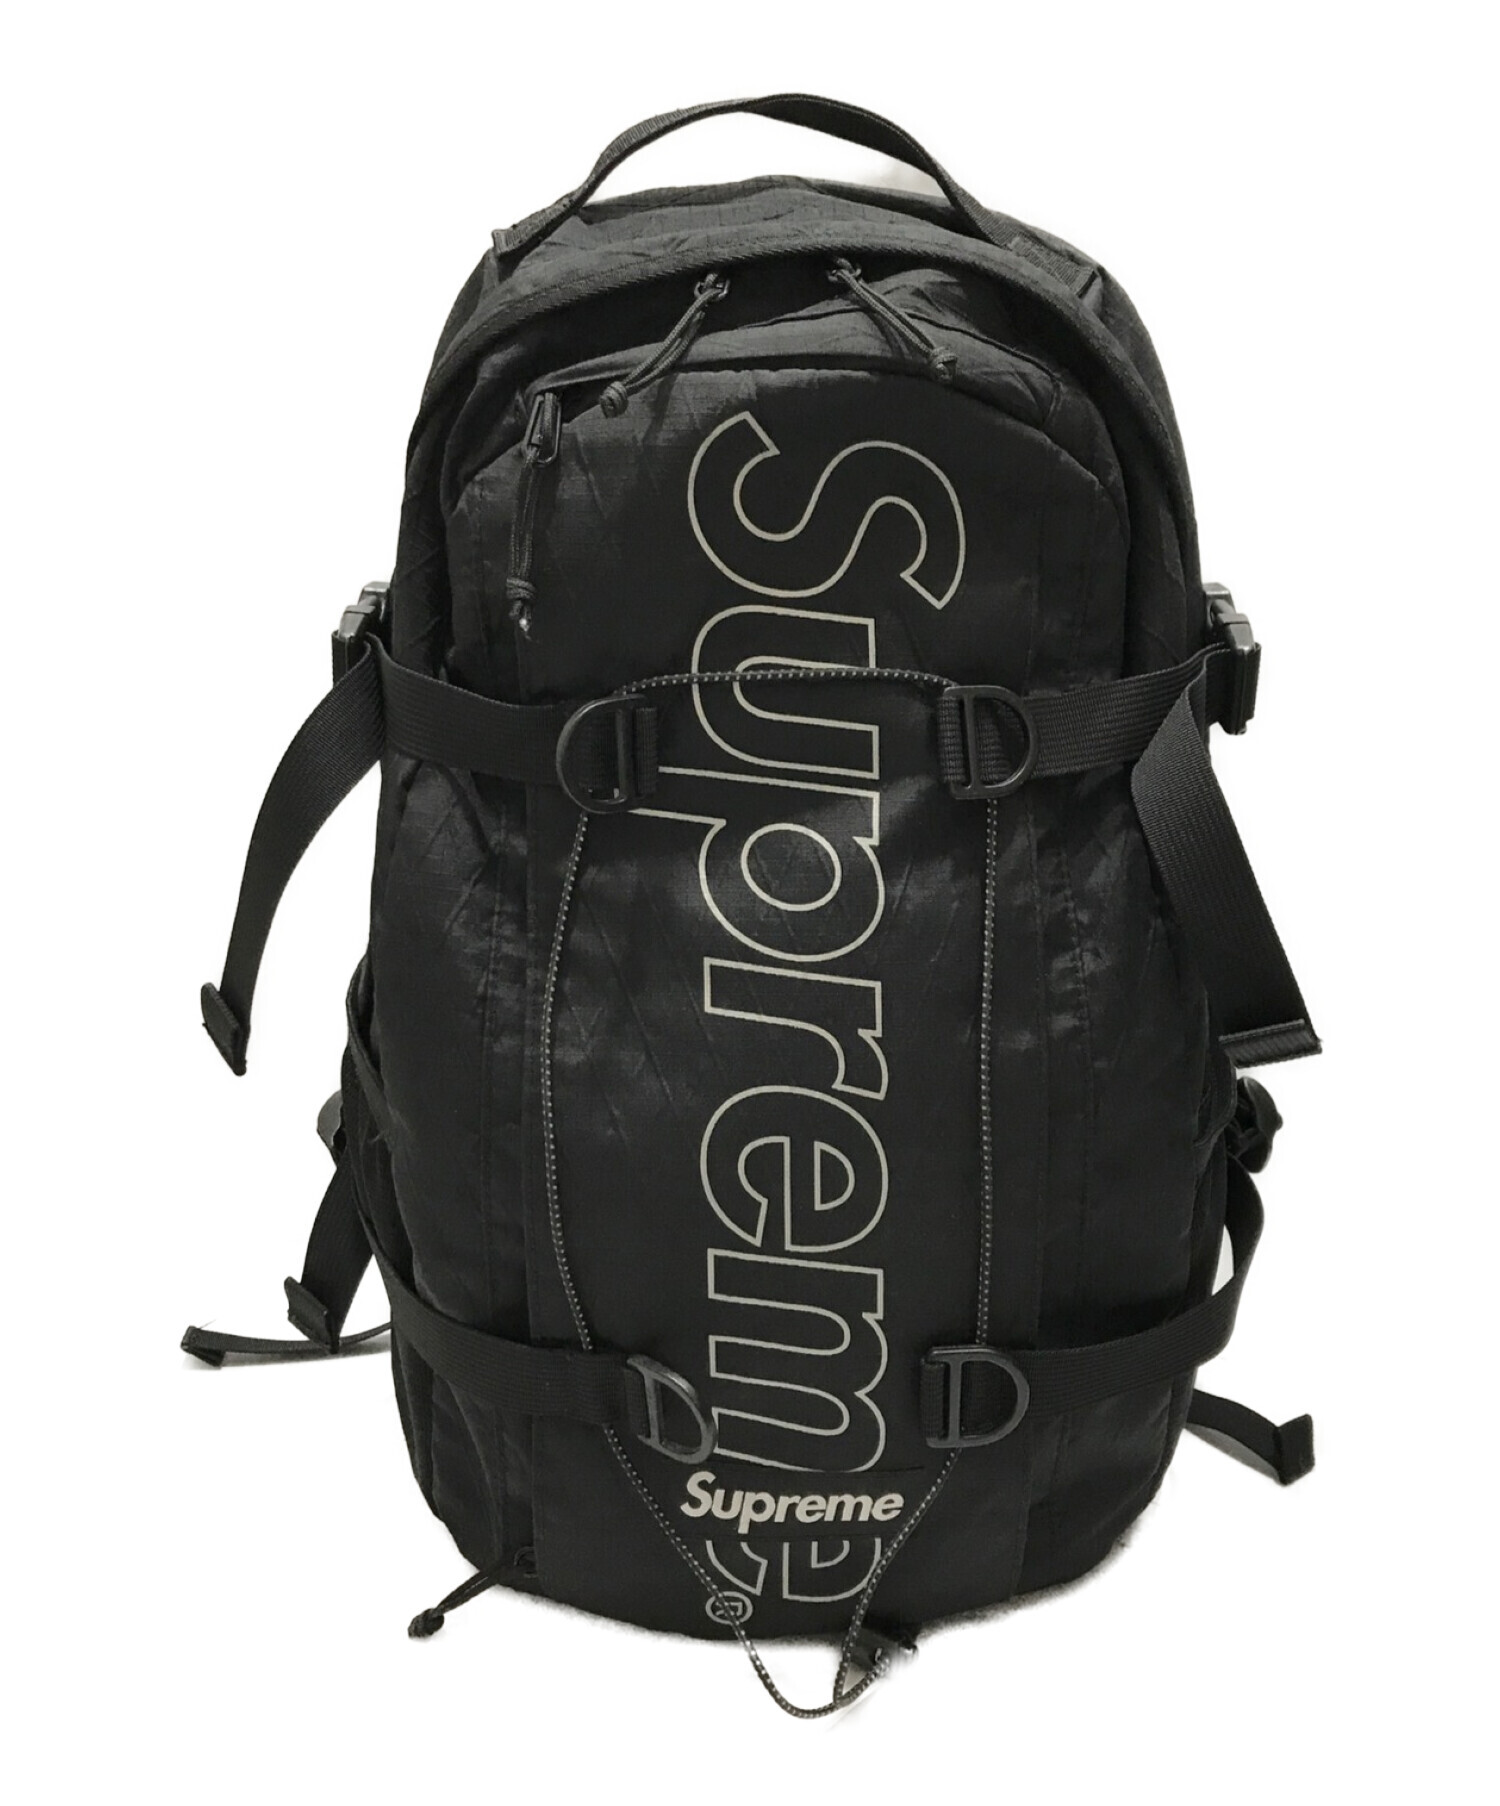 Supreme 18AW BackPack Black バックパック 黒 www.krzysztofbialy.com